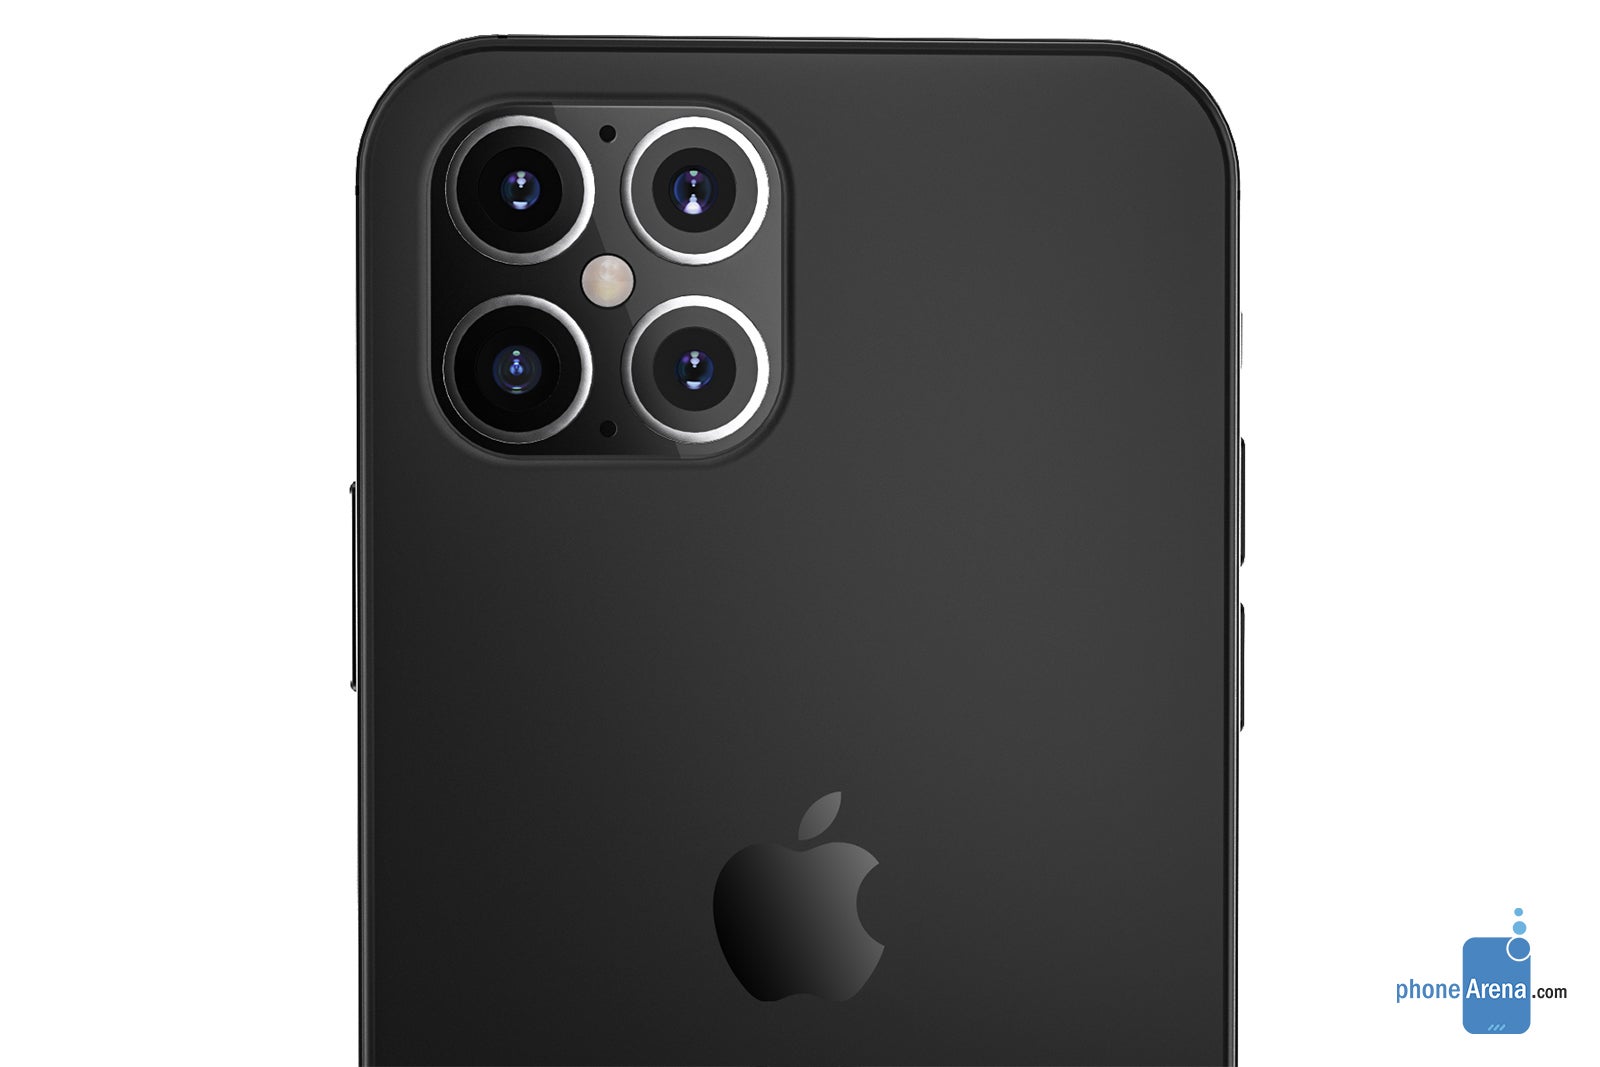 Apple iPhone 12 Pro concept render based on early information - Apple&#039;s 2020 iPhones could introduce this big camera upgrade